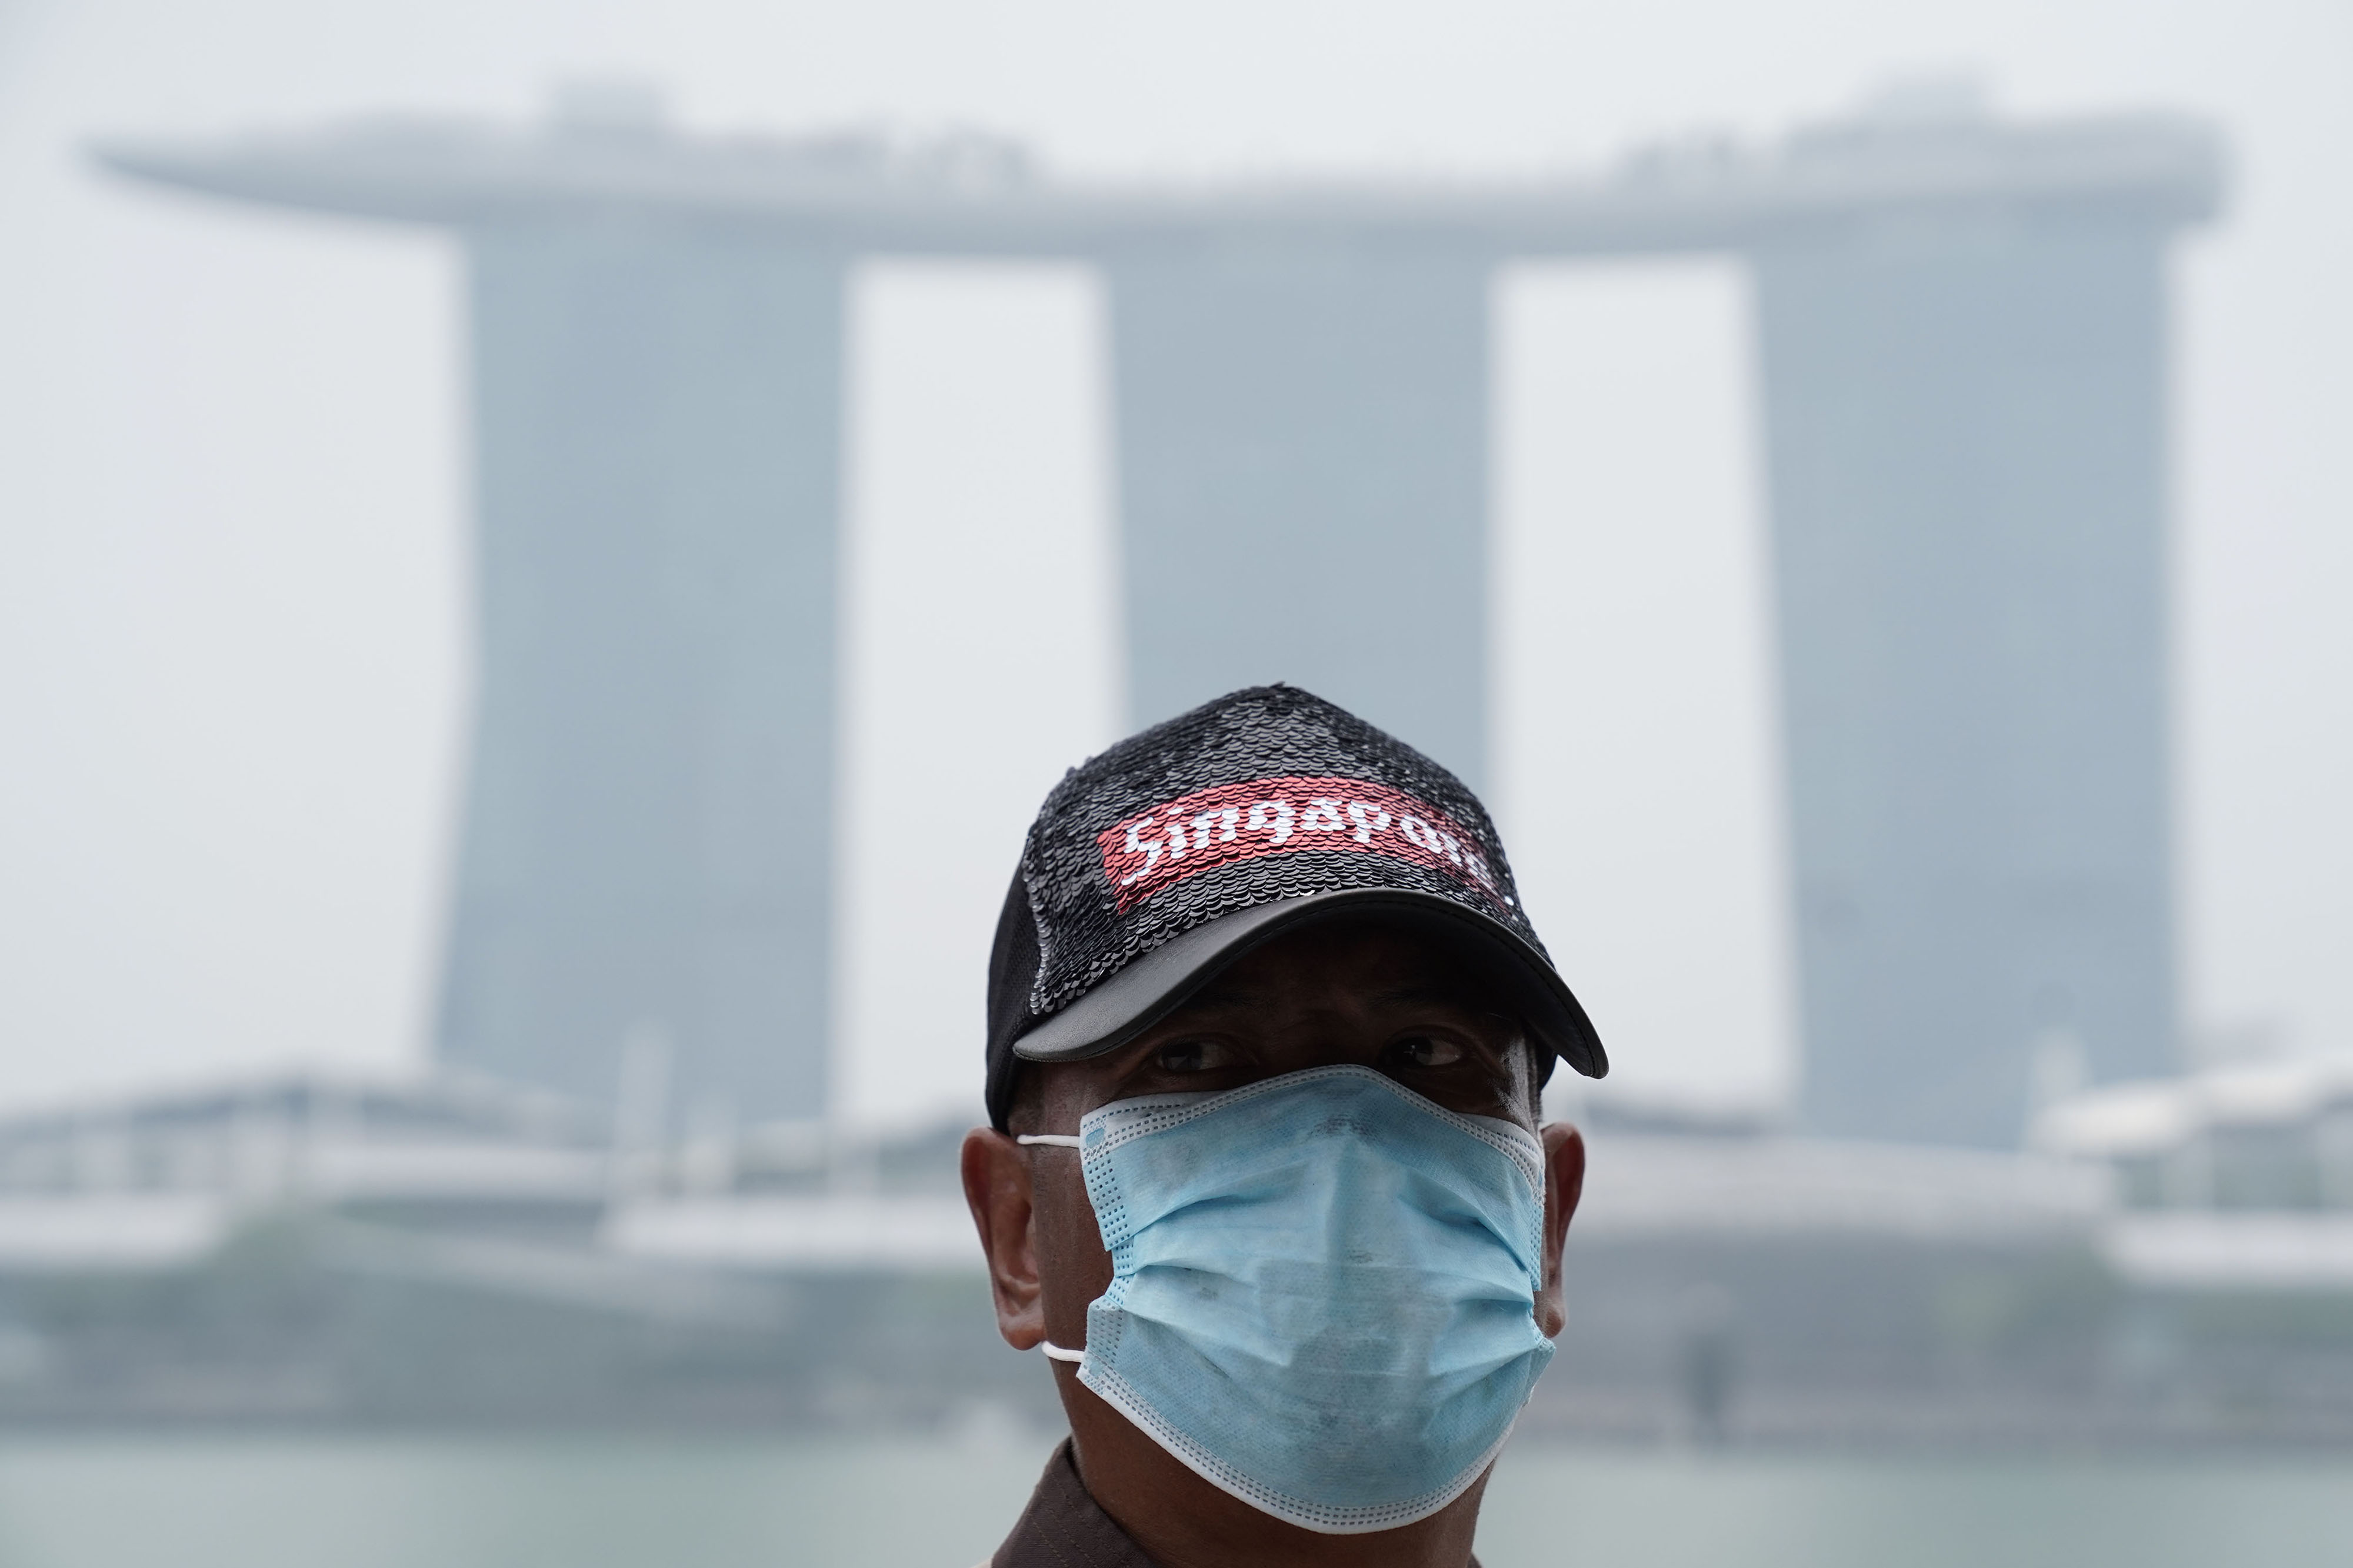 A man wears a face mask in front of the haze shrouded Marina Bay Sands hotel and casino in Singapore.